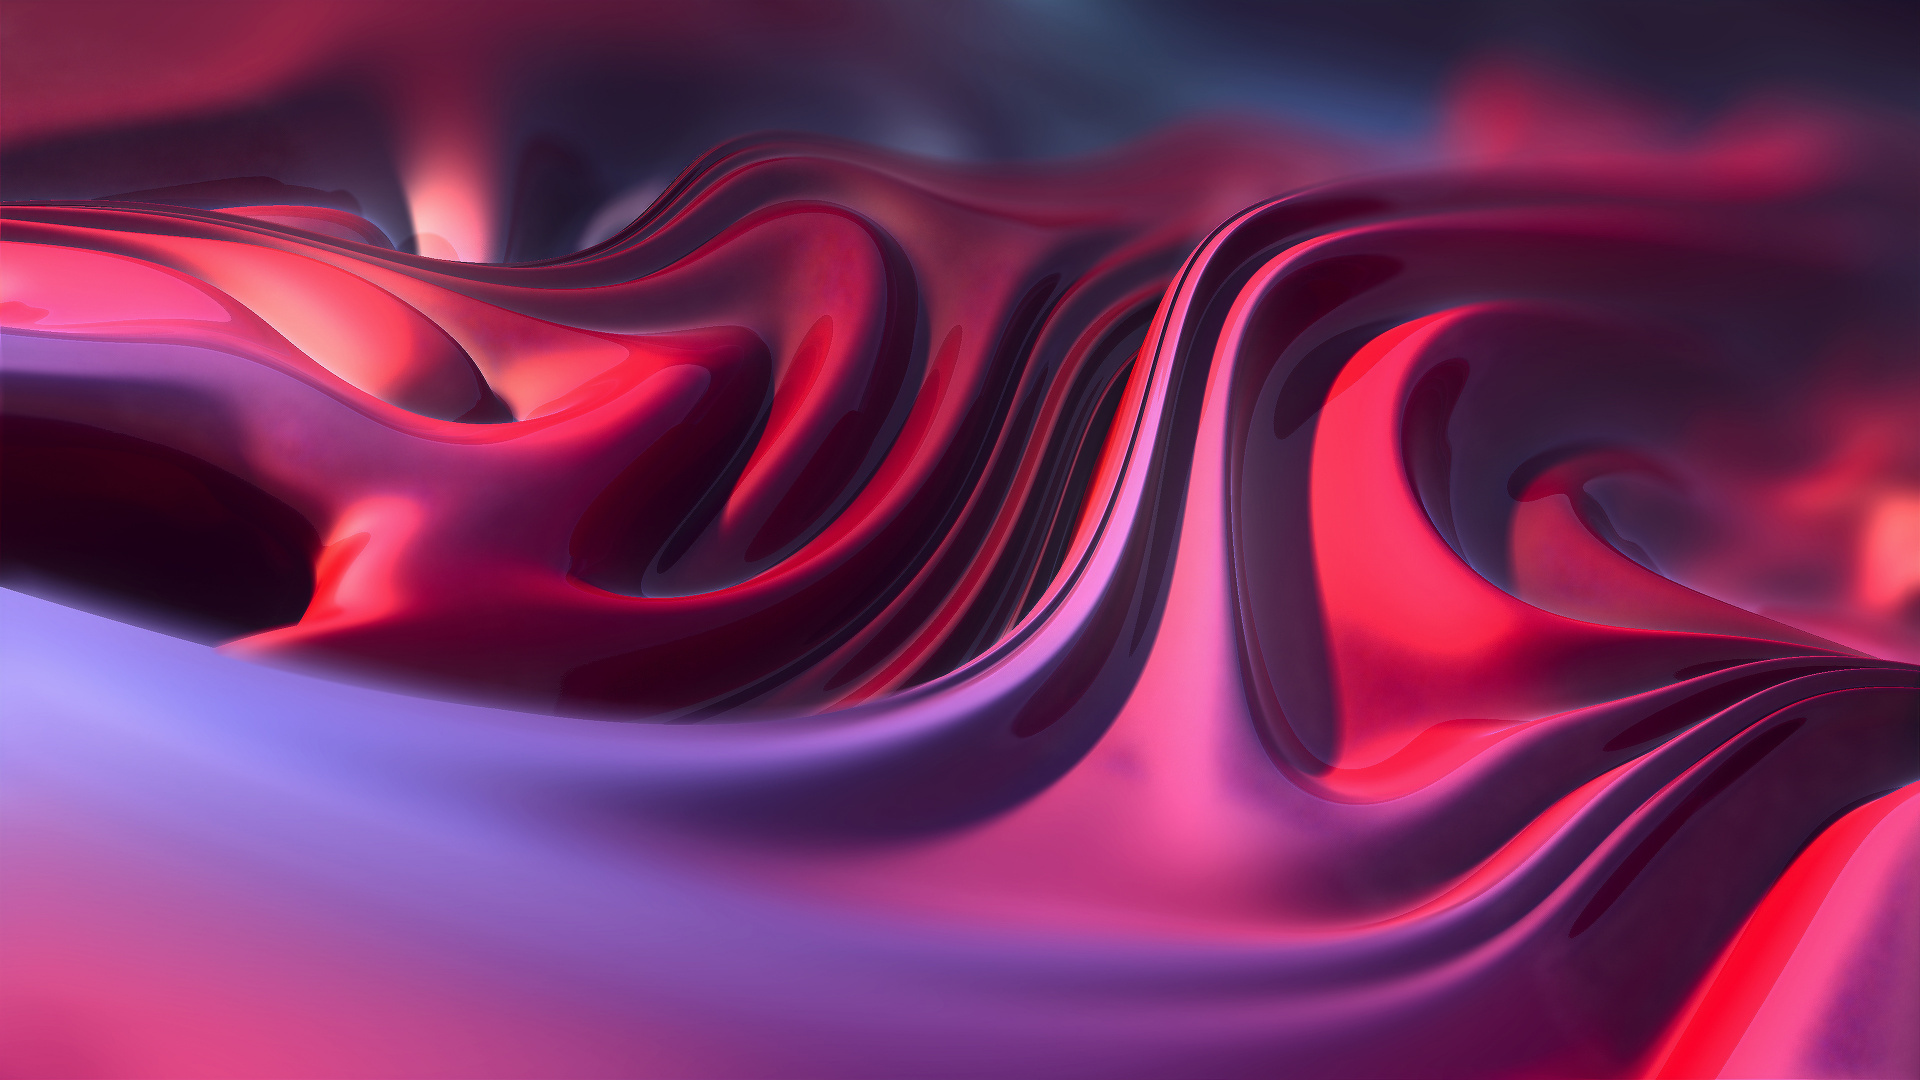 Pink and White Abstract Painting. Wallpaper in 1920x1080 Resolution